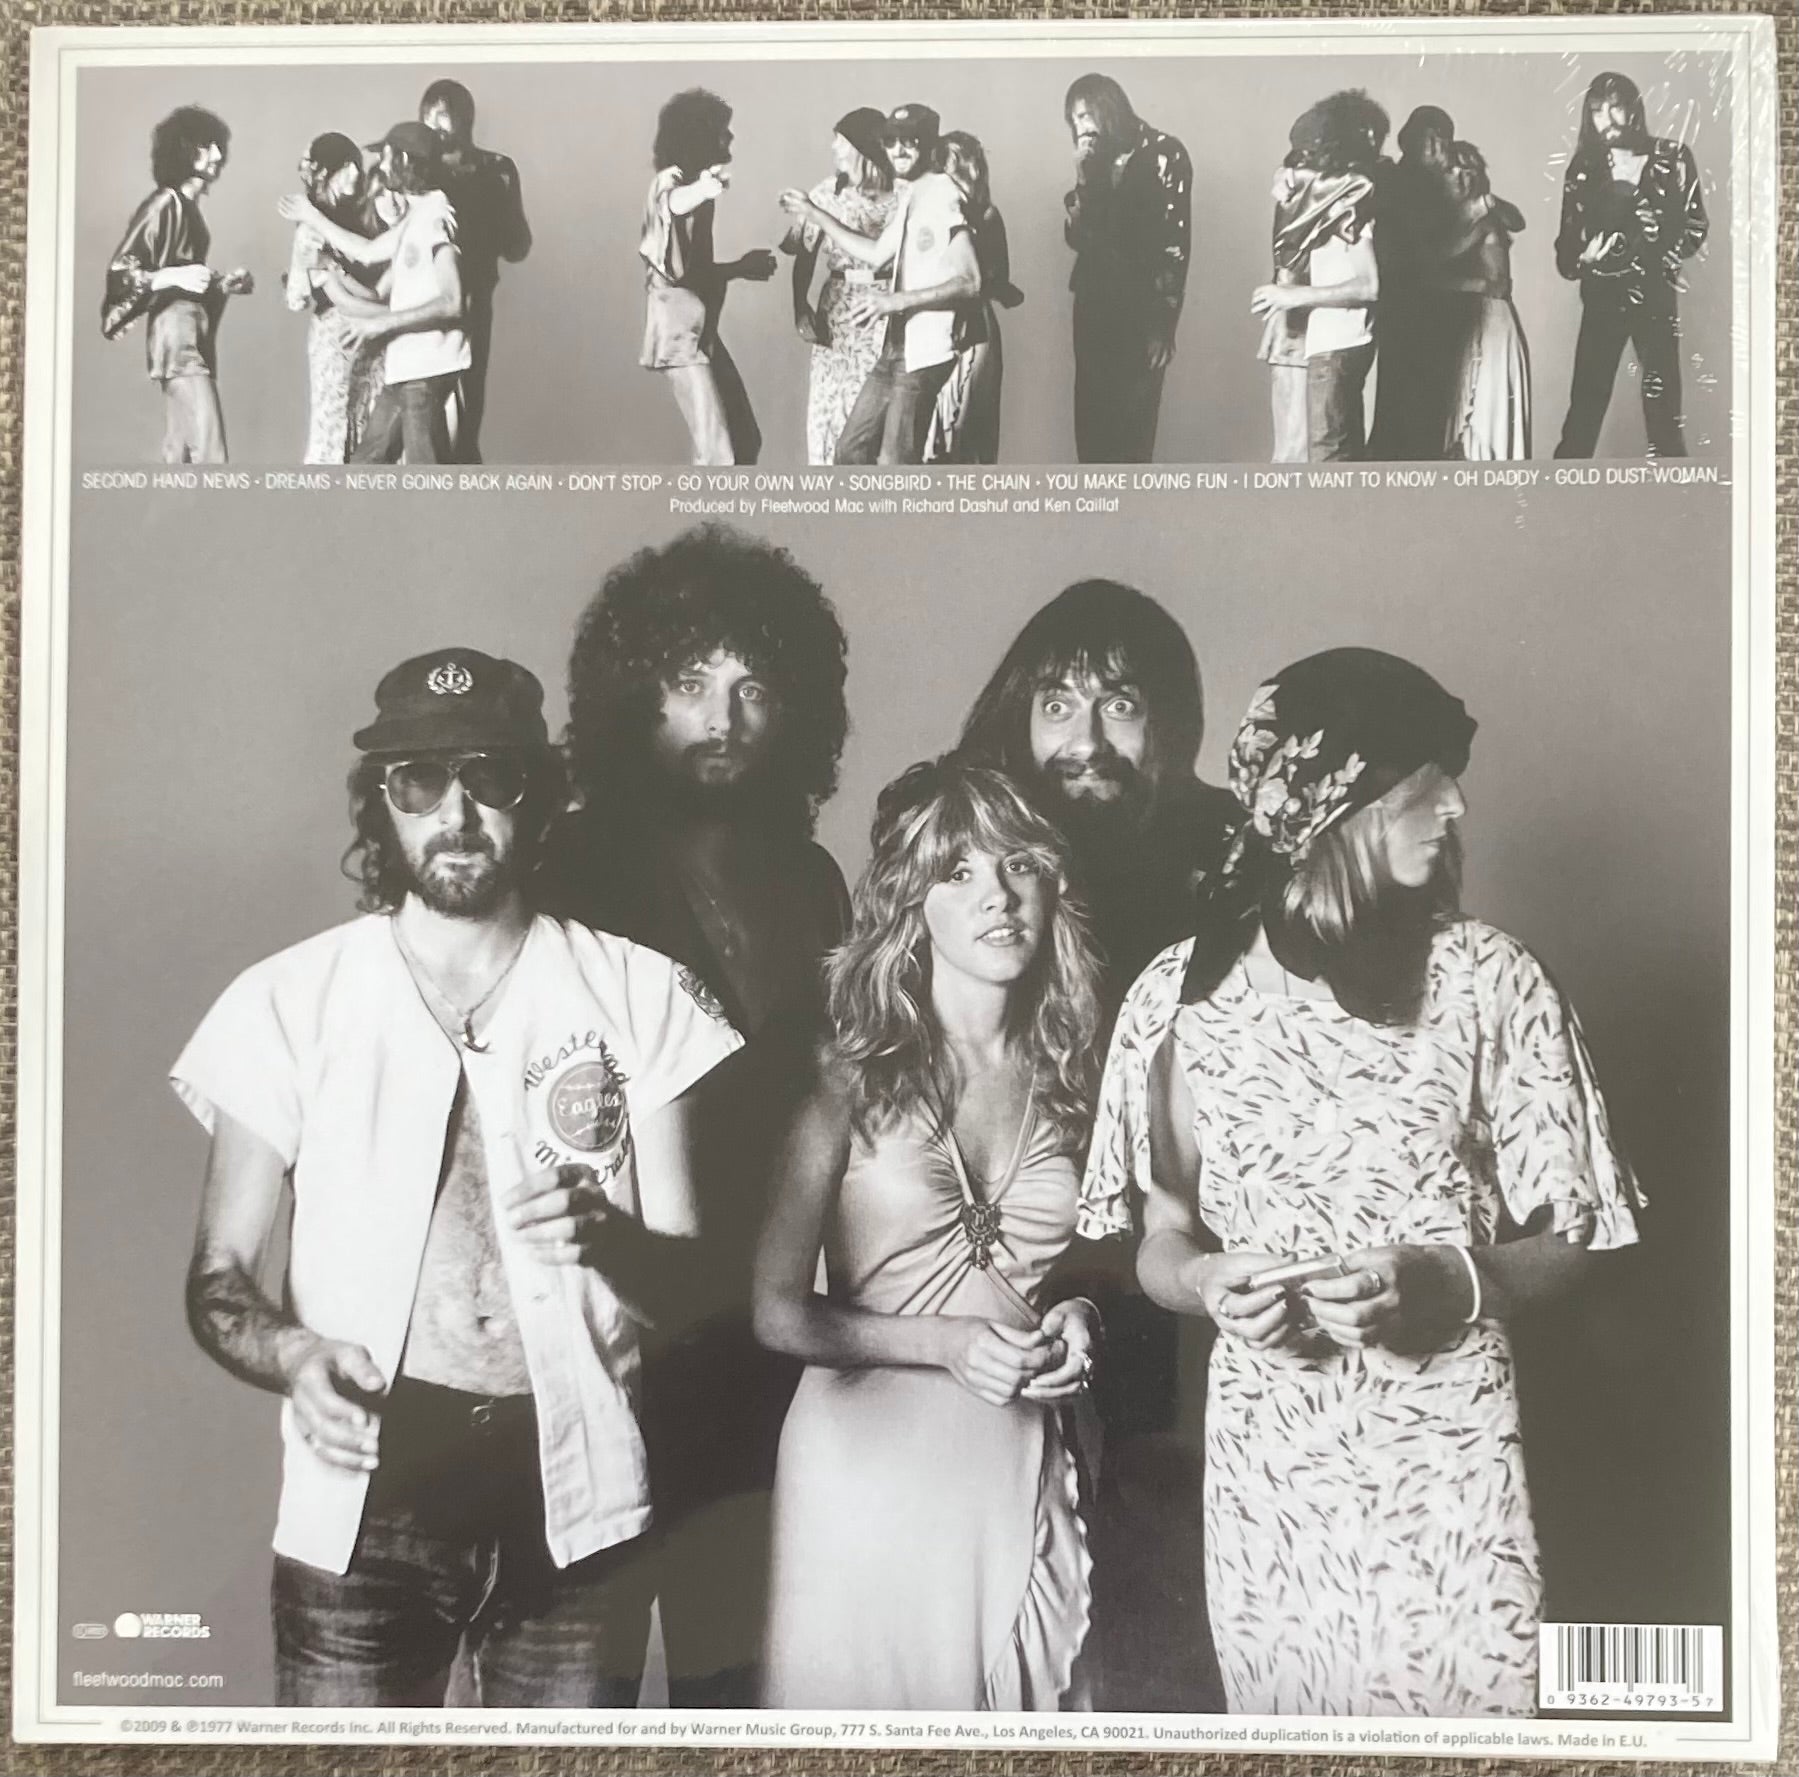 The back of 'Fleetwood Mac - Rumours' on vinyl. It is sealed and unplayed.